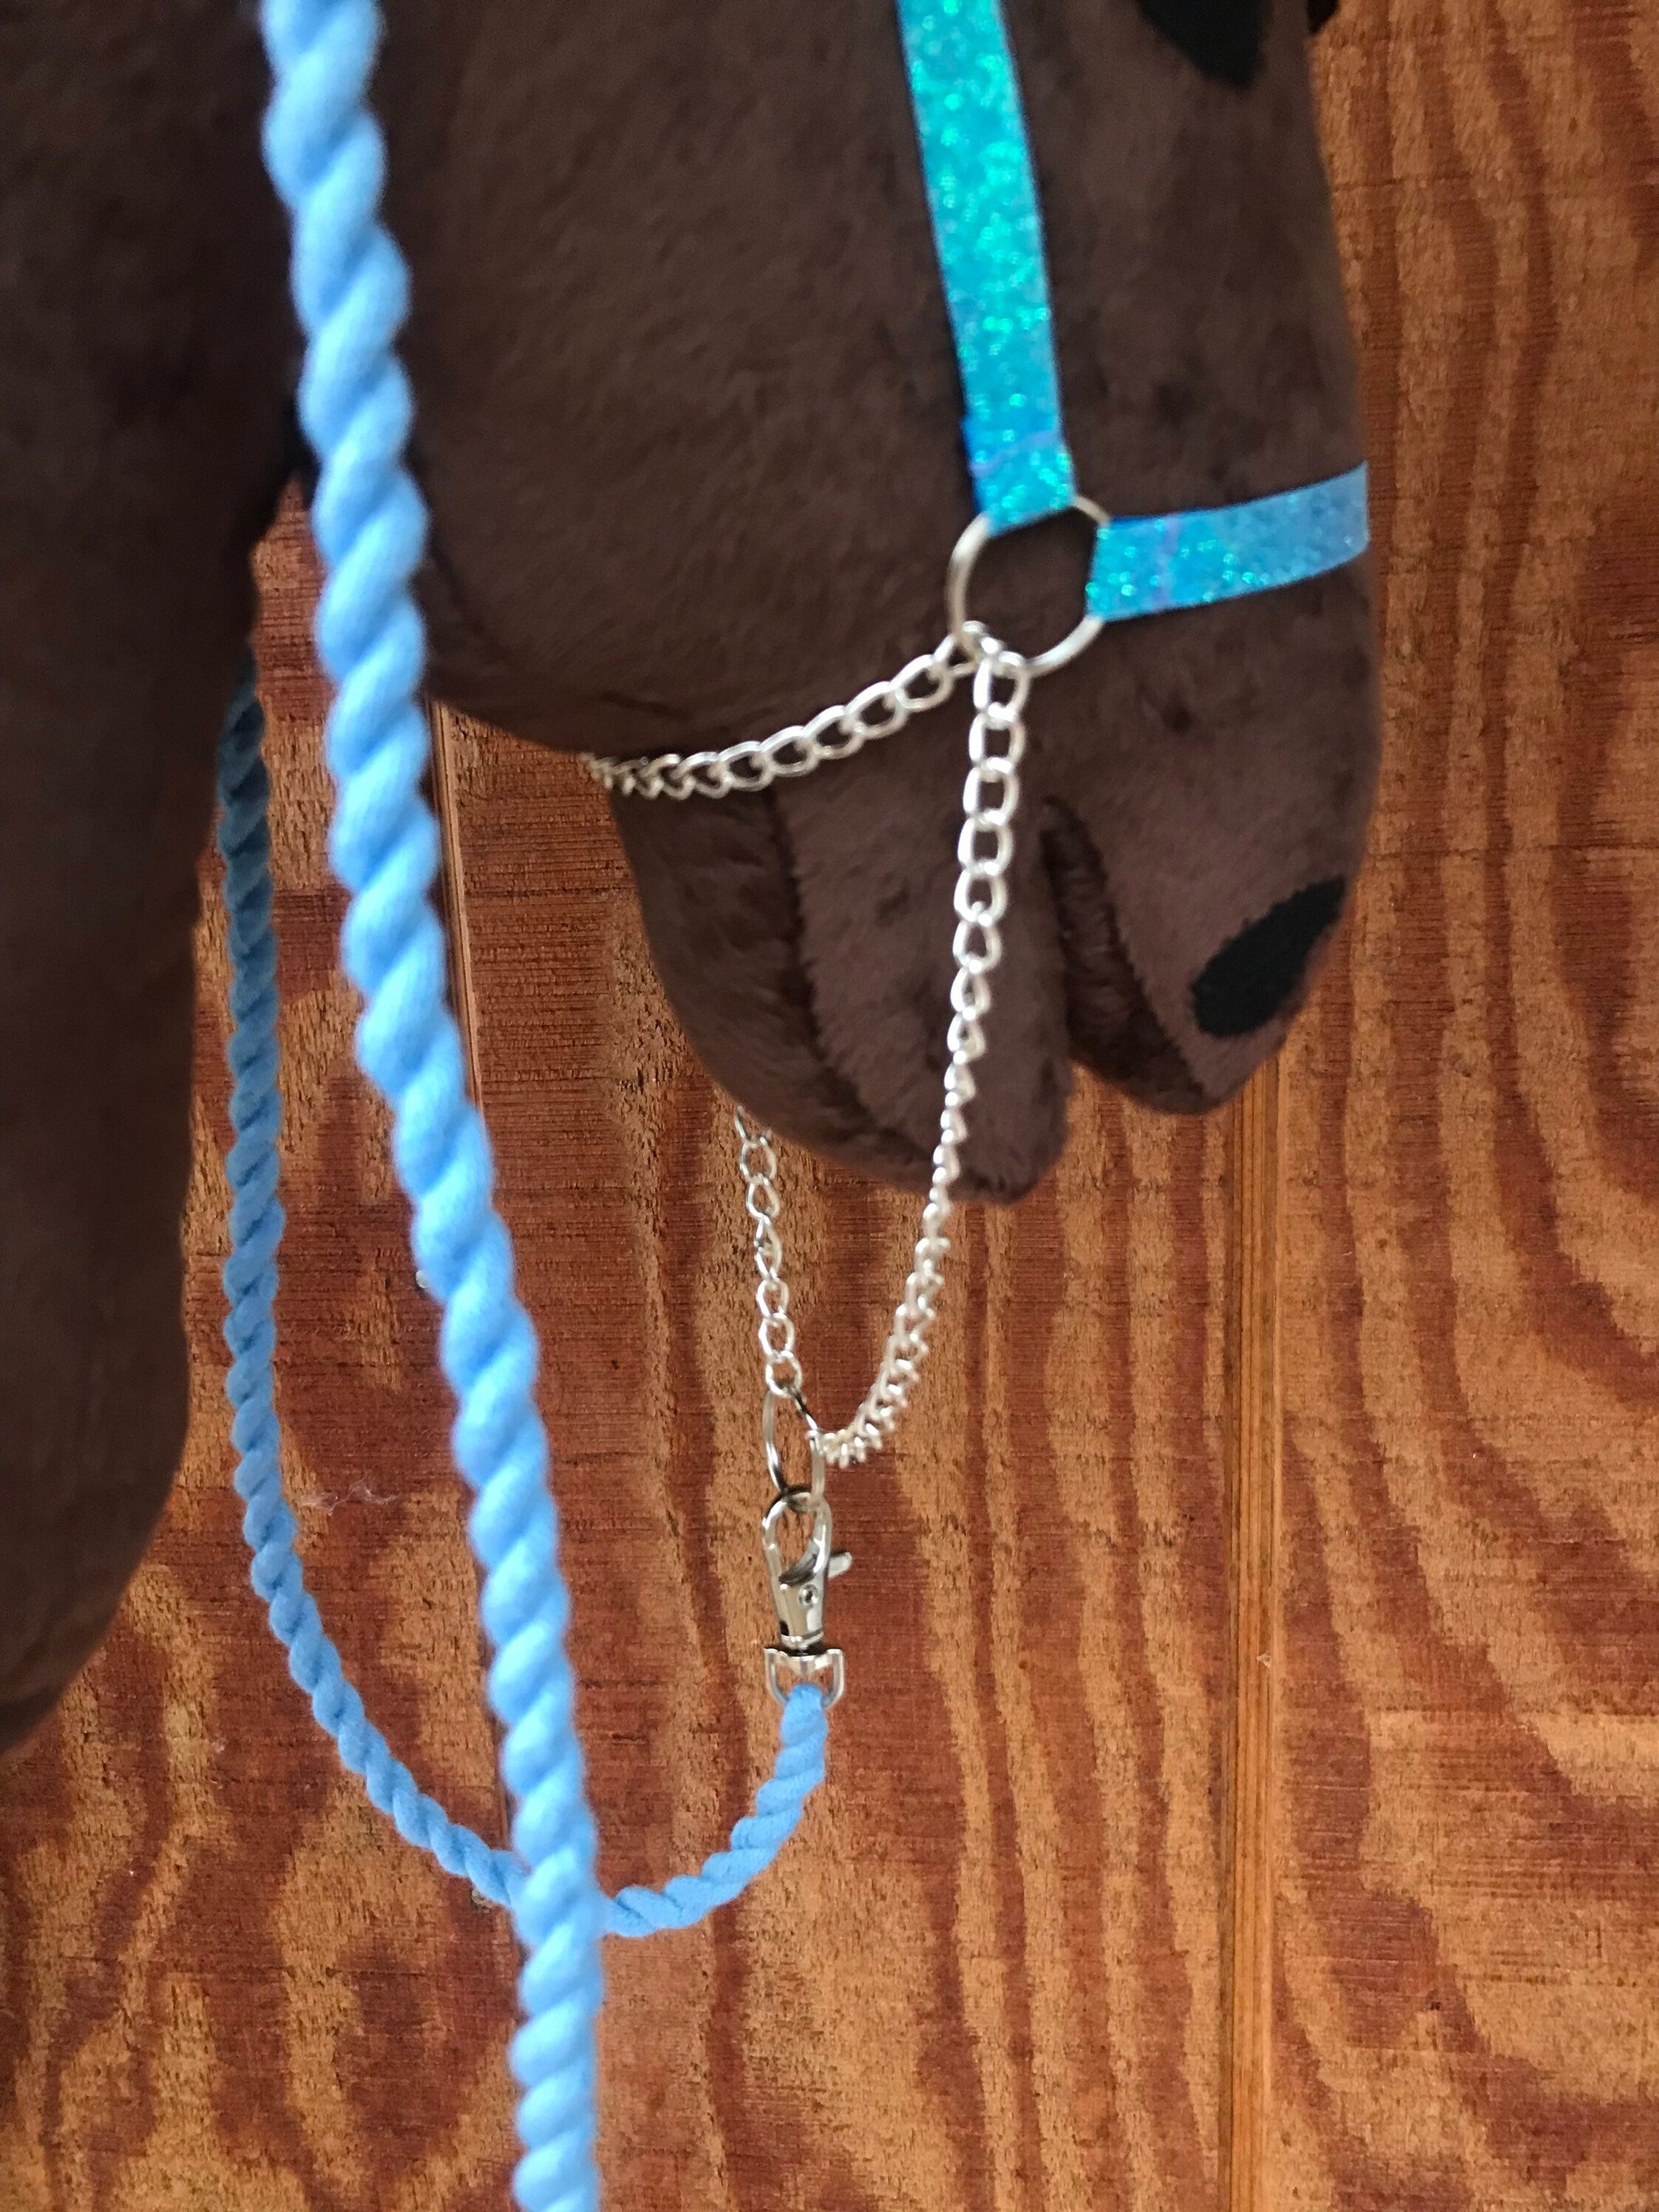 Hobby horse show halter sparkly blue with lead rope, hobby horse tack, hobby horse accessories